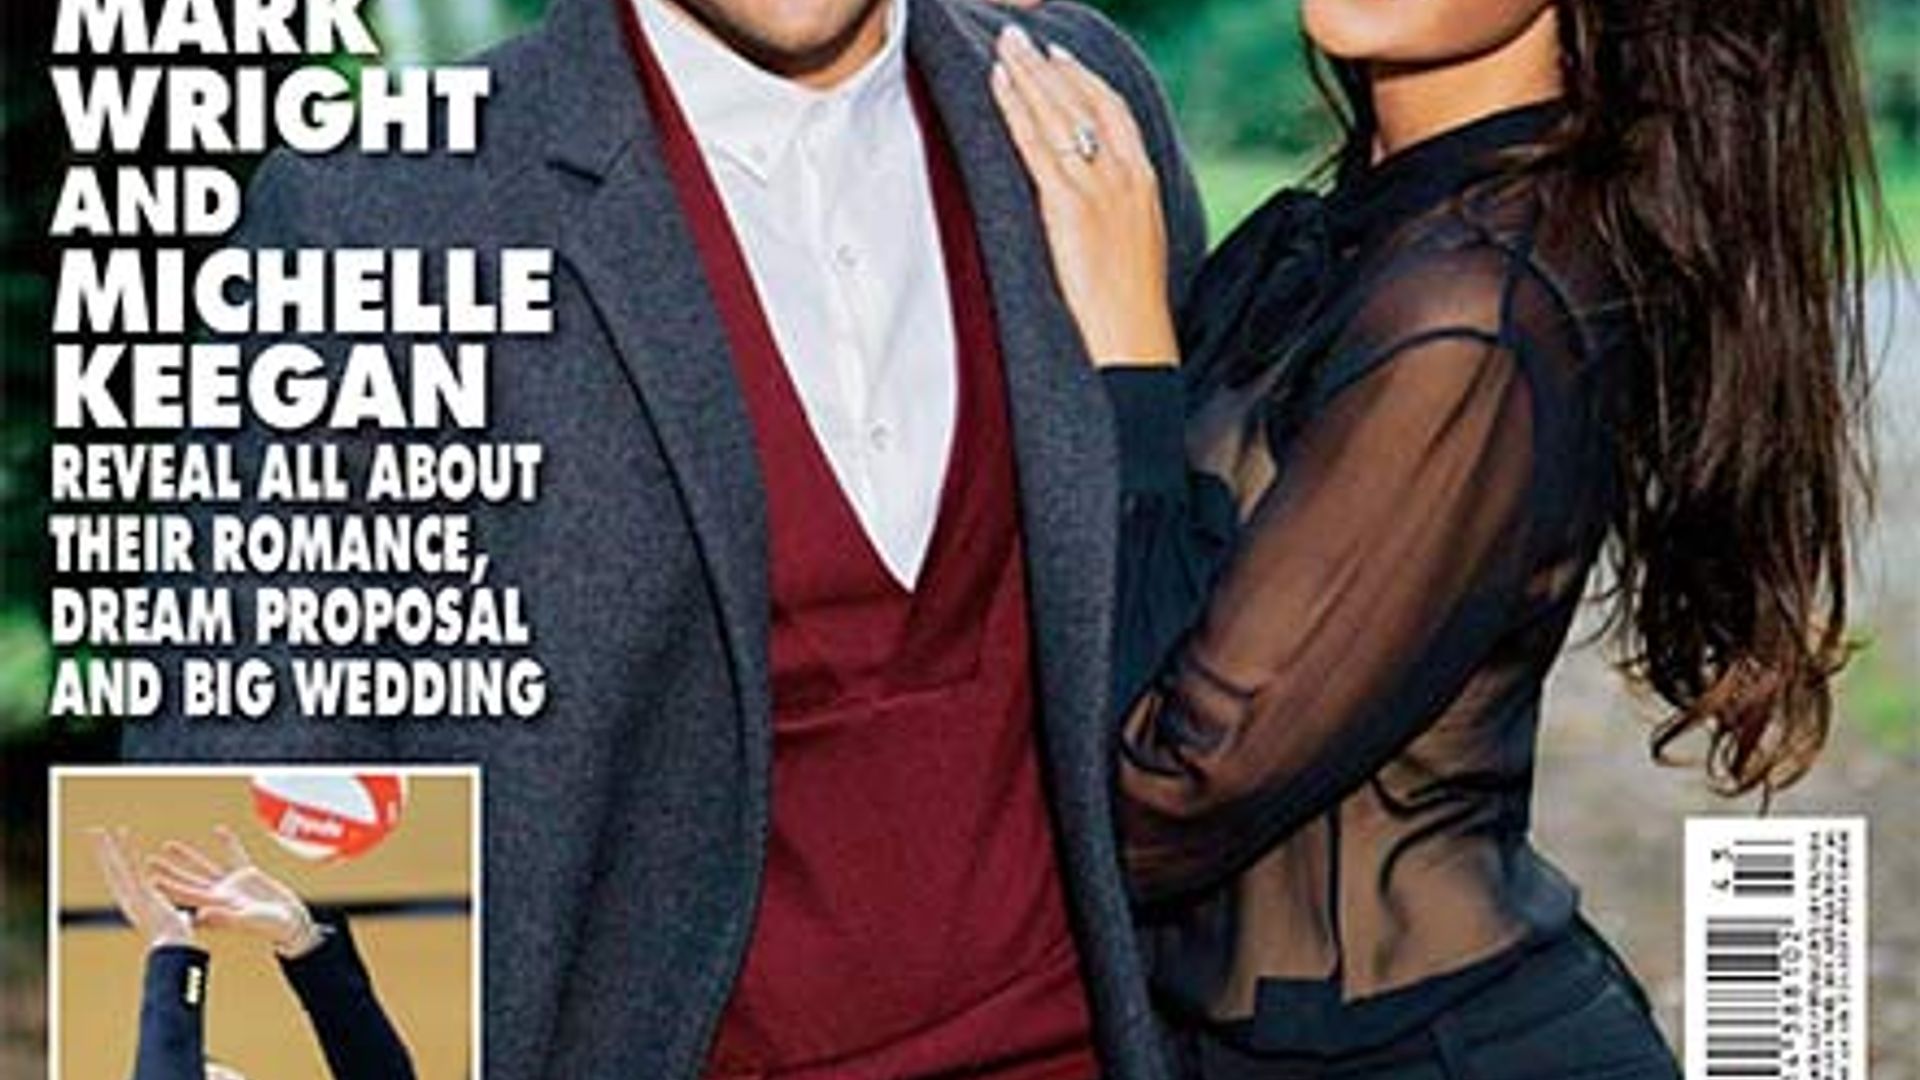 Michelle Keegan and Mark Wright reveal proposal details exclusively to HELLO! in first ever interview as a couple